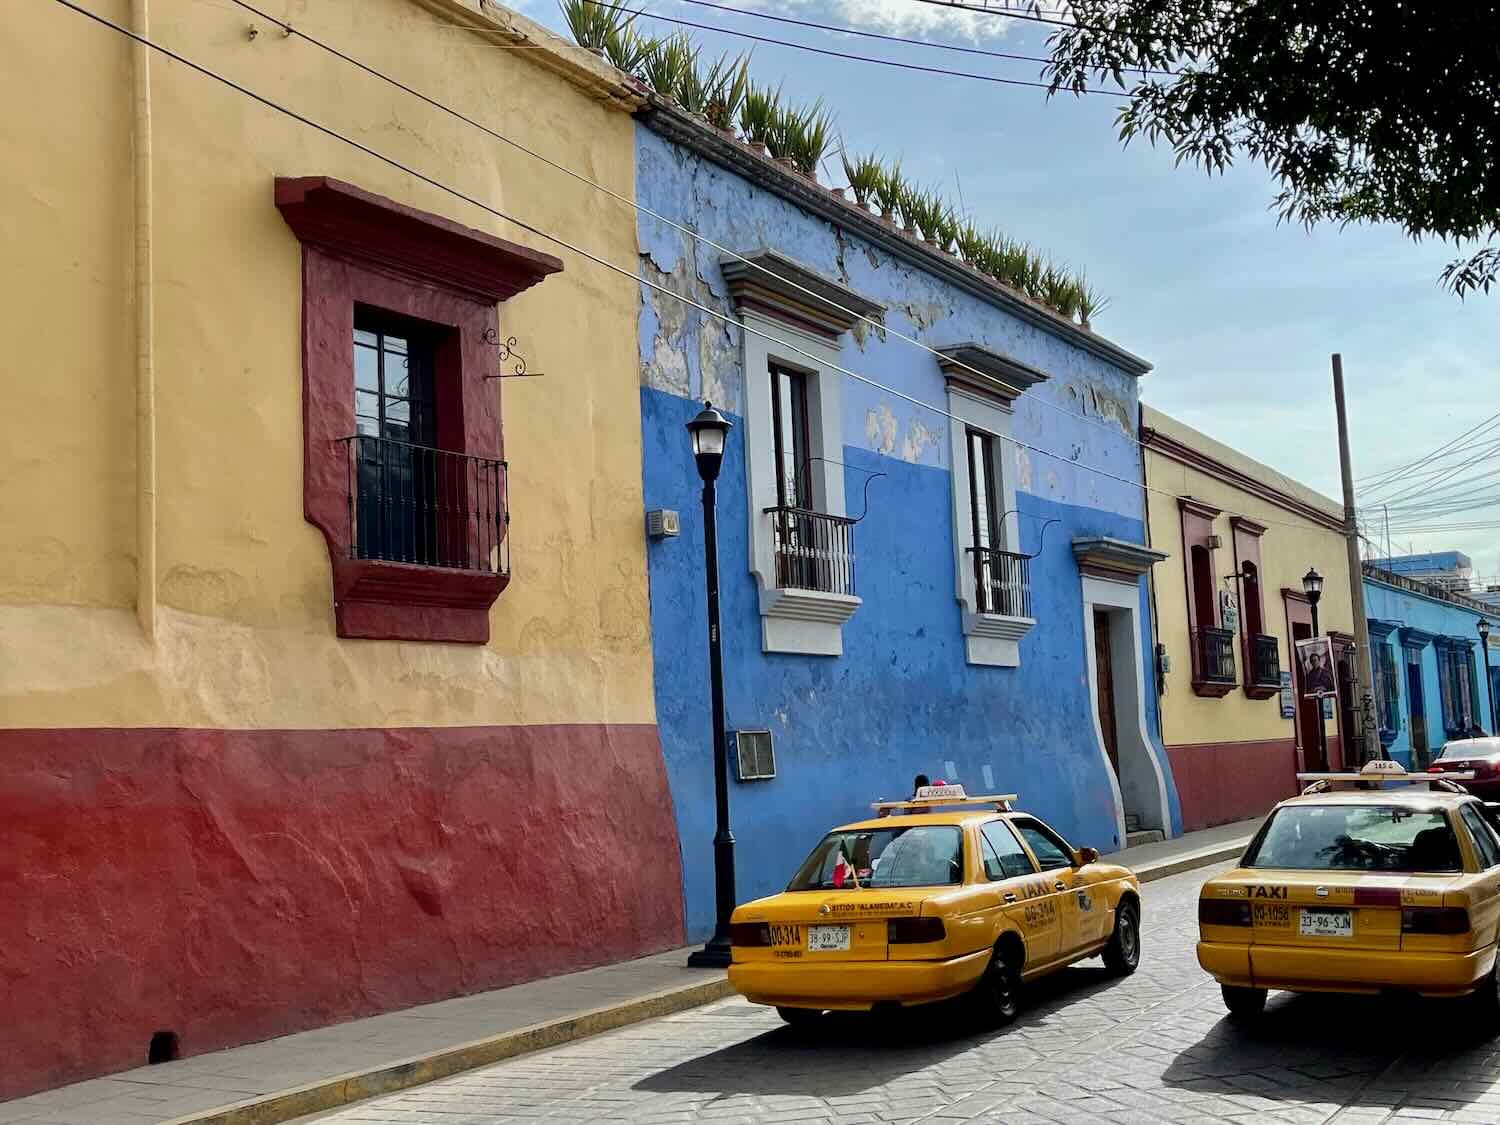 The bold colors of a city street